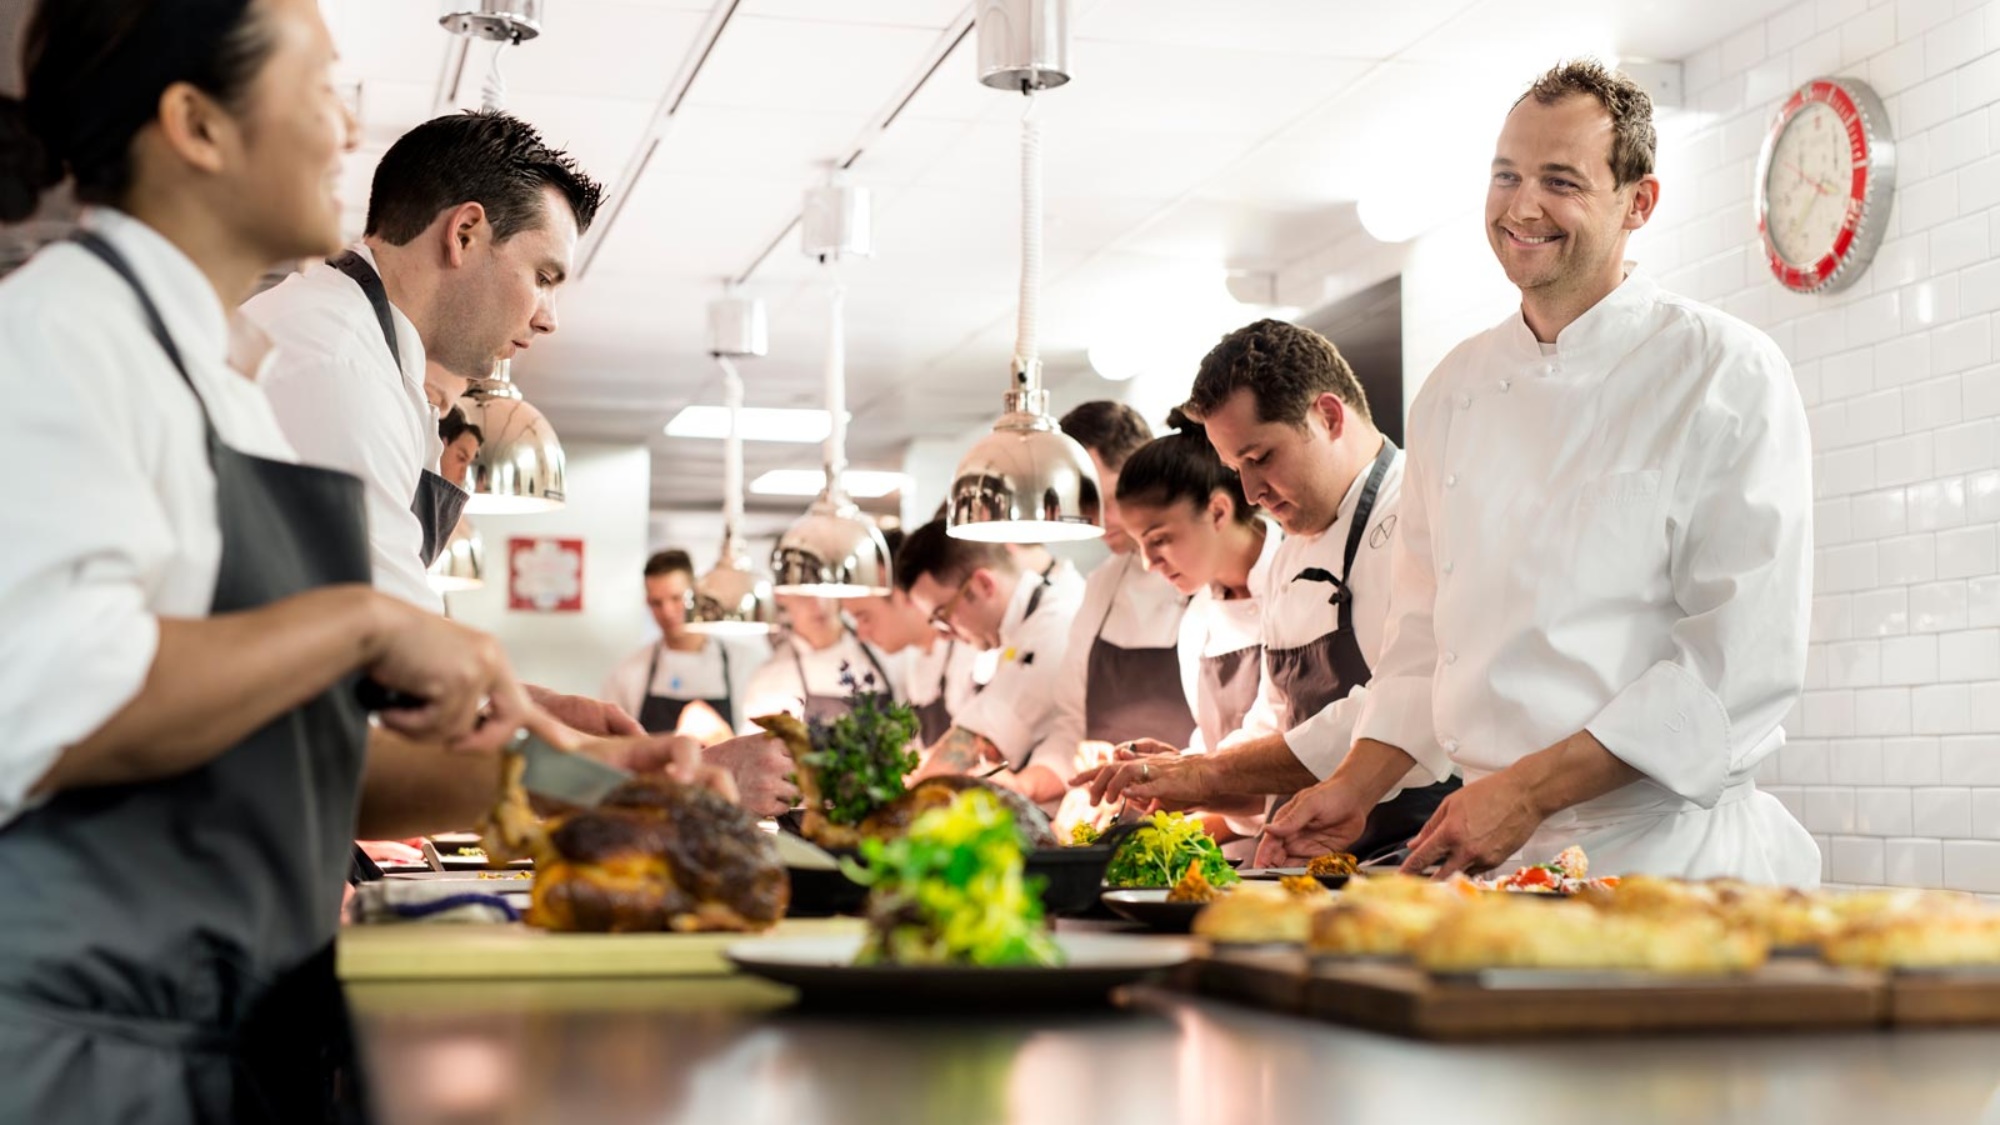 NoMad chef Daniel Humm with his team.